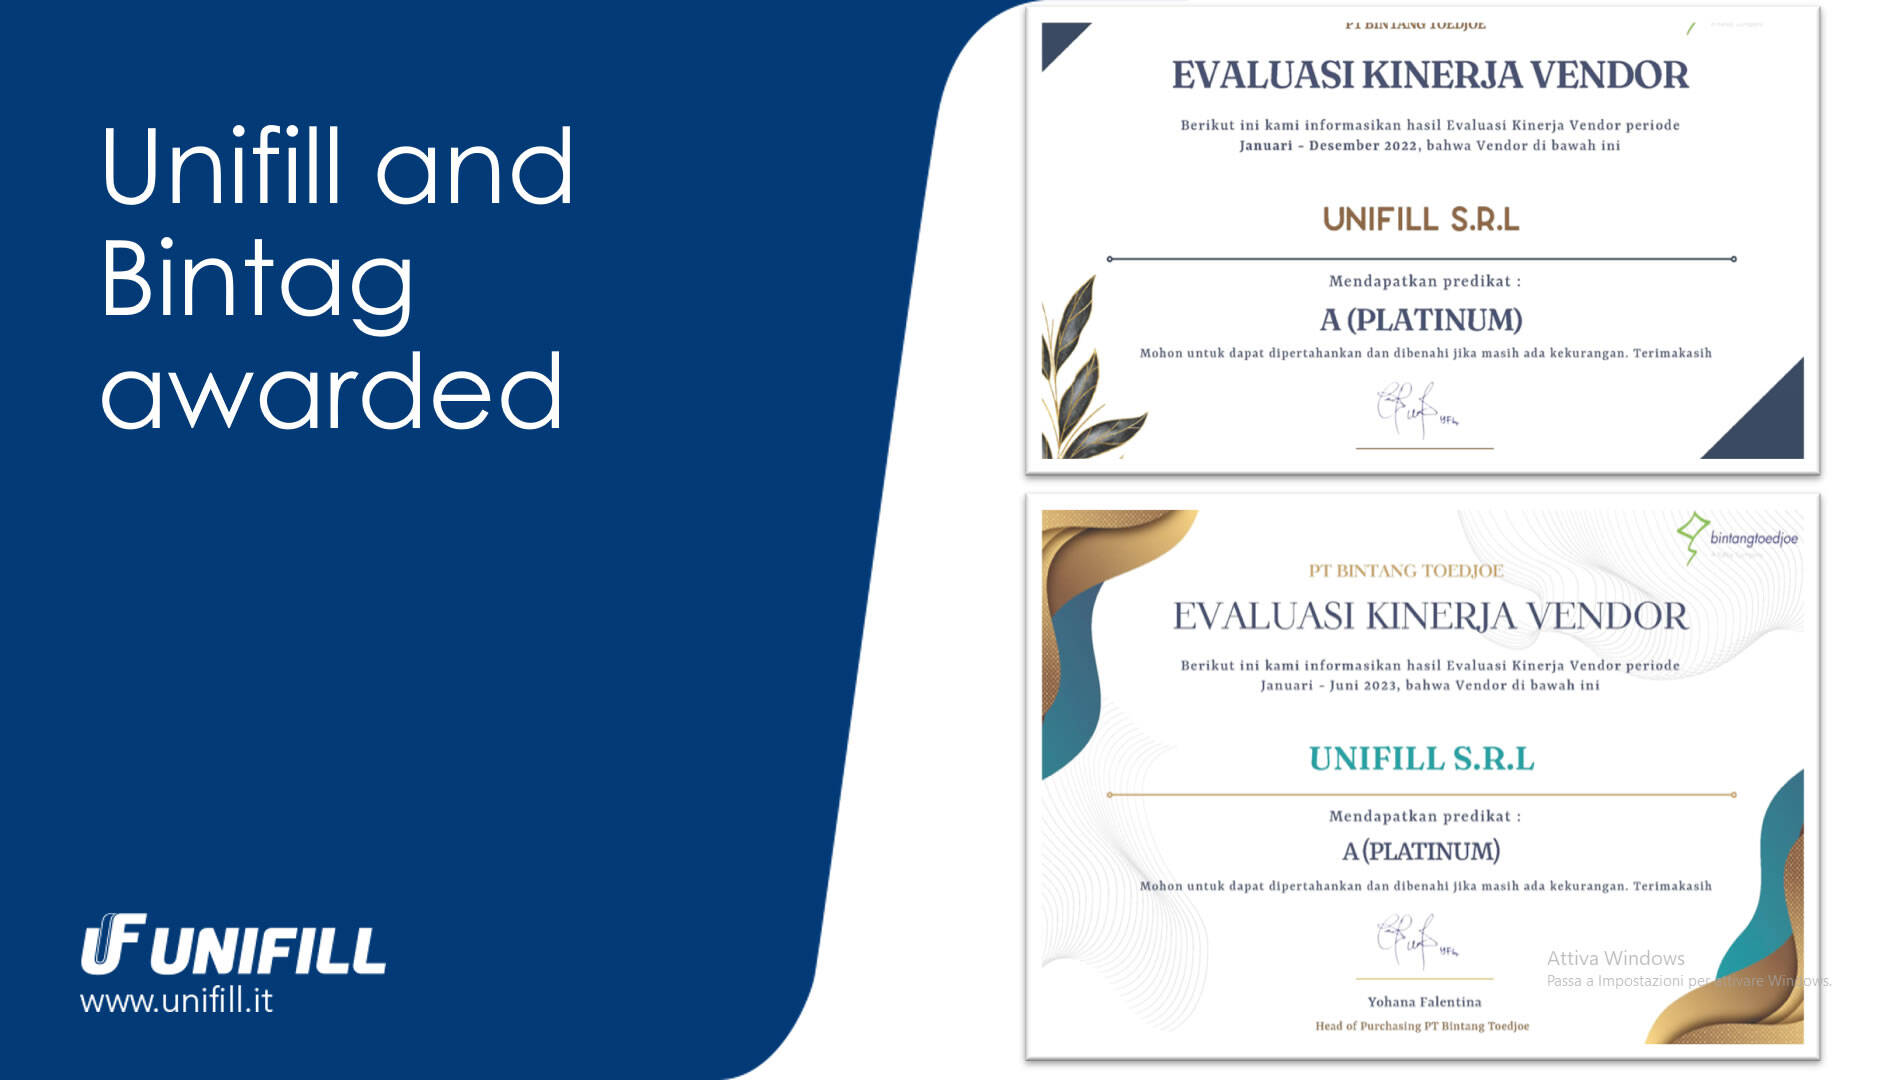 Unifill and Bintag awarded 